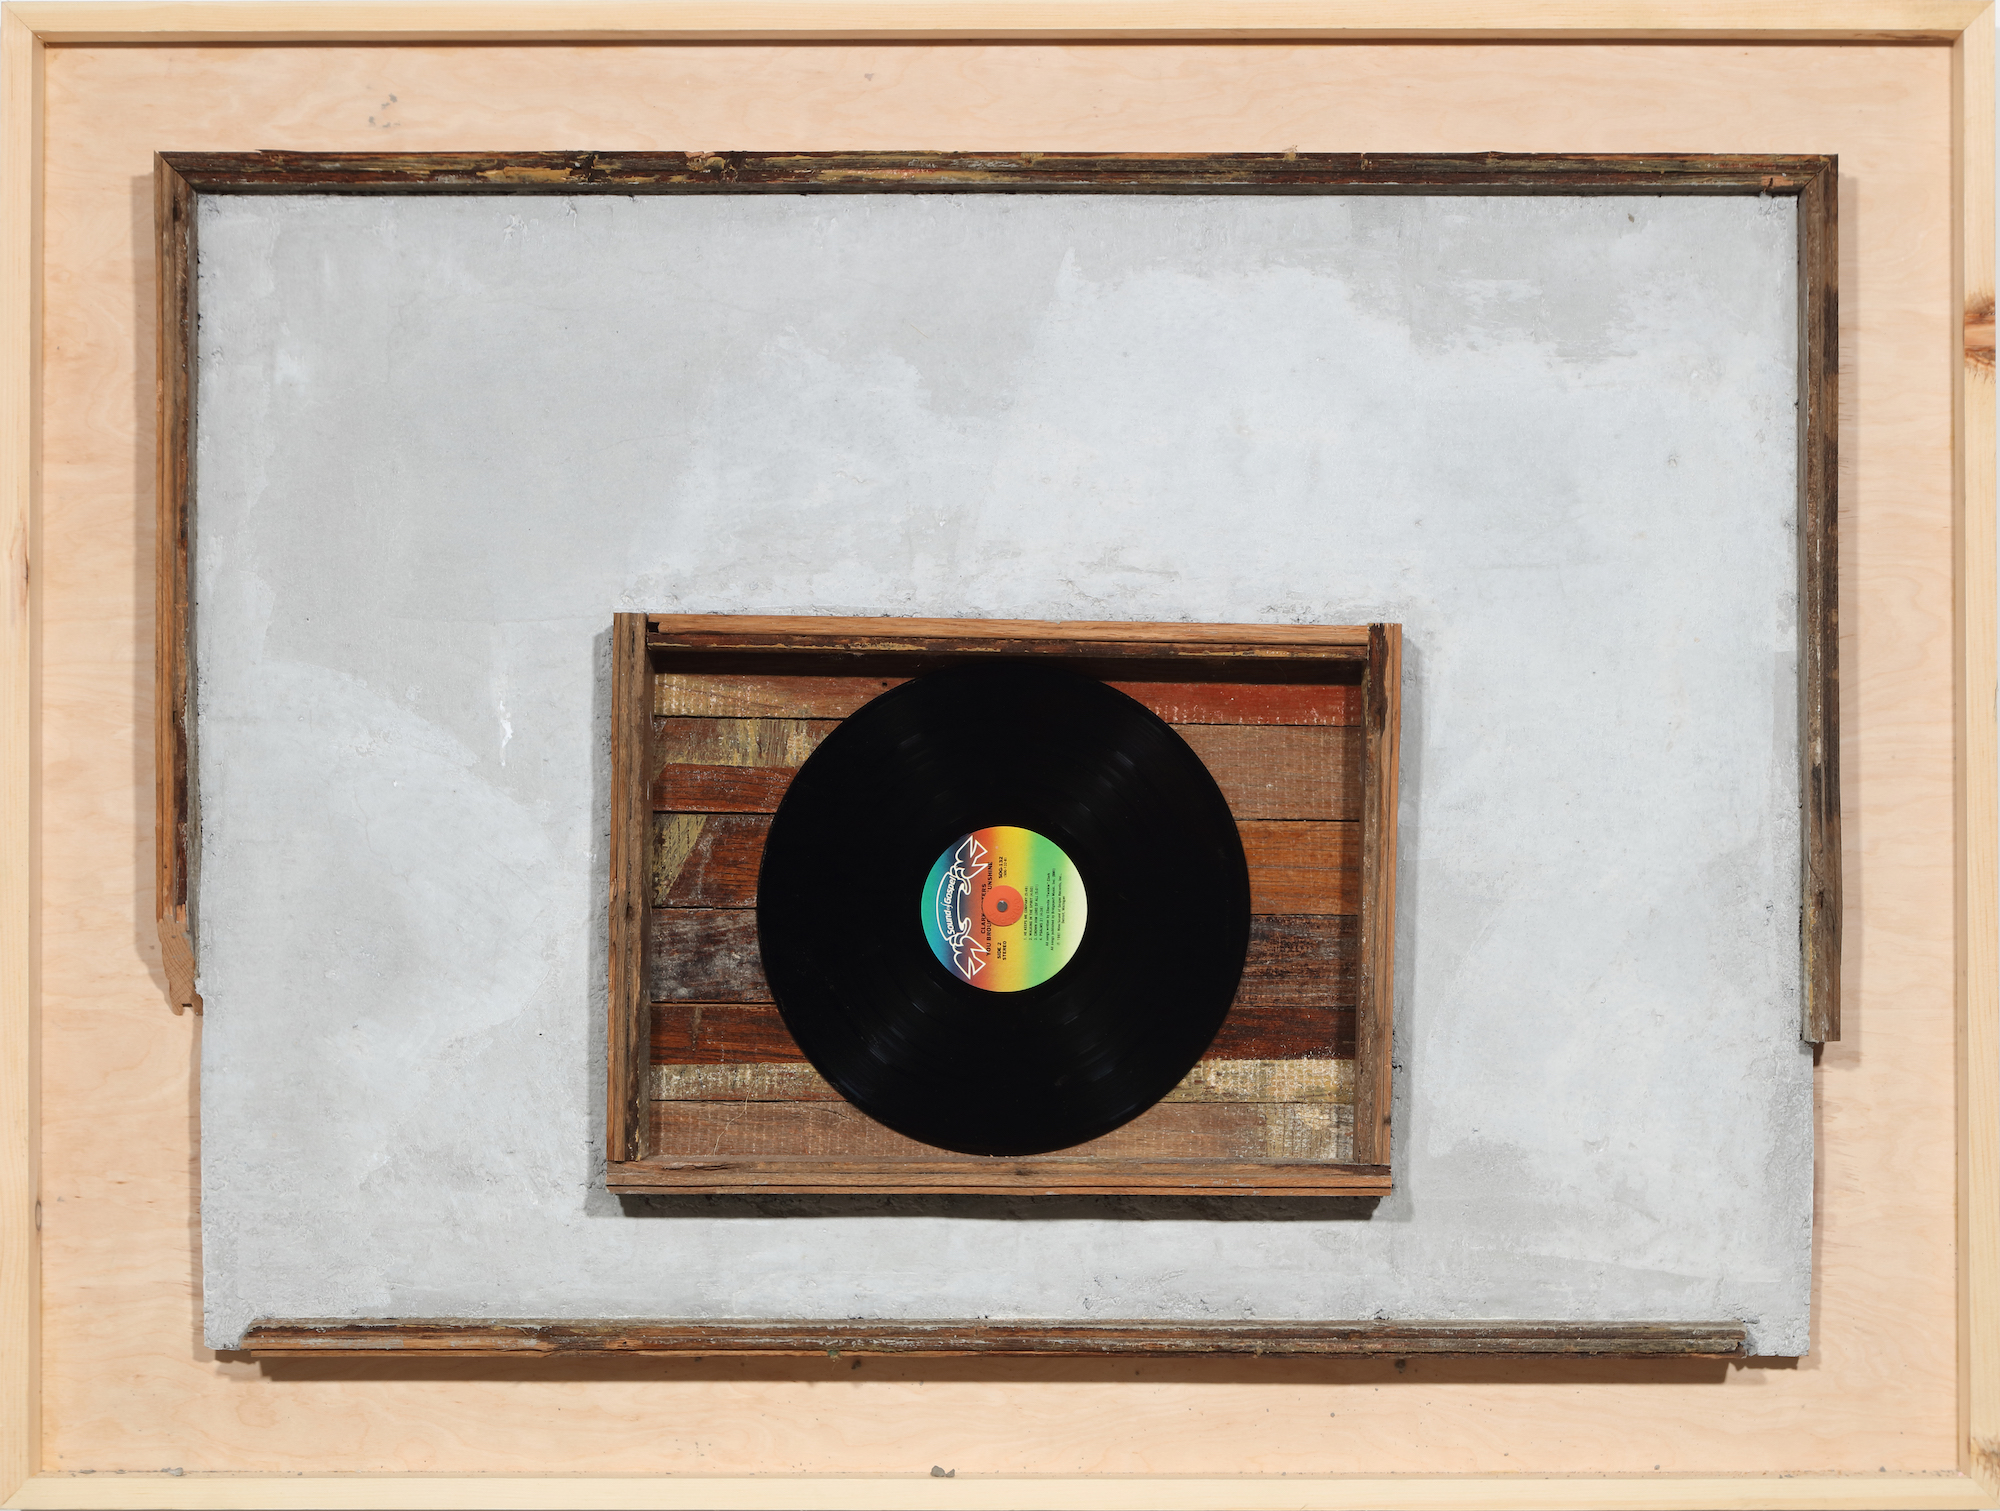 A rectangular panel of wood housing a gray slab of concrete hung horizontally with a smaller wooden panel and a vinyl record embedded in the middle of the slab.